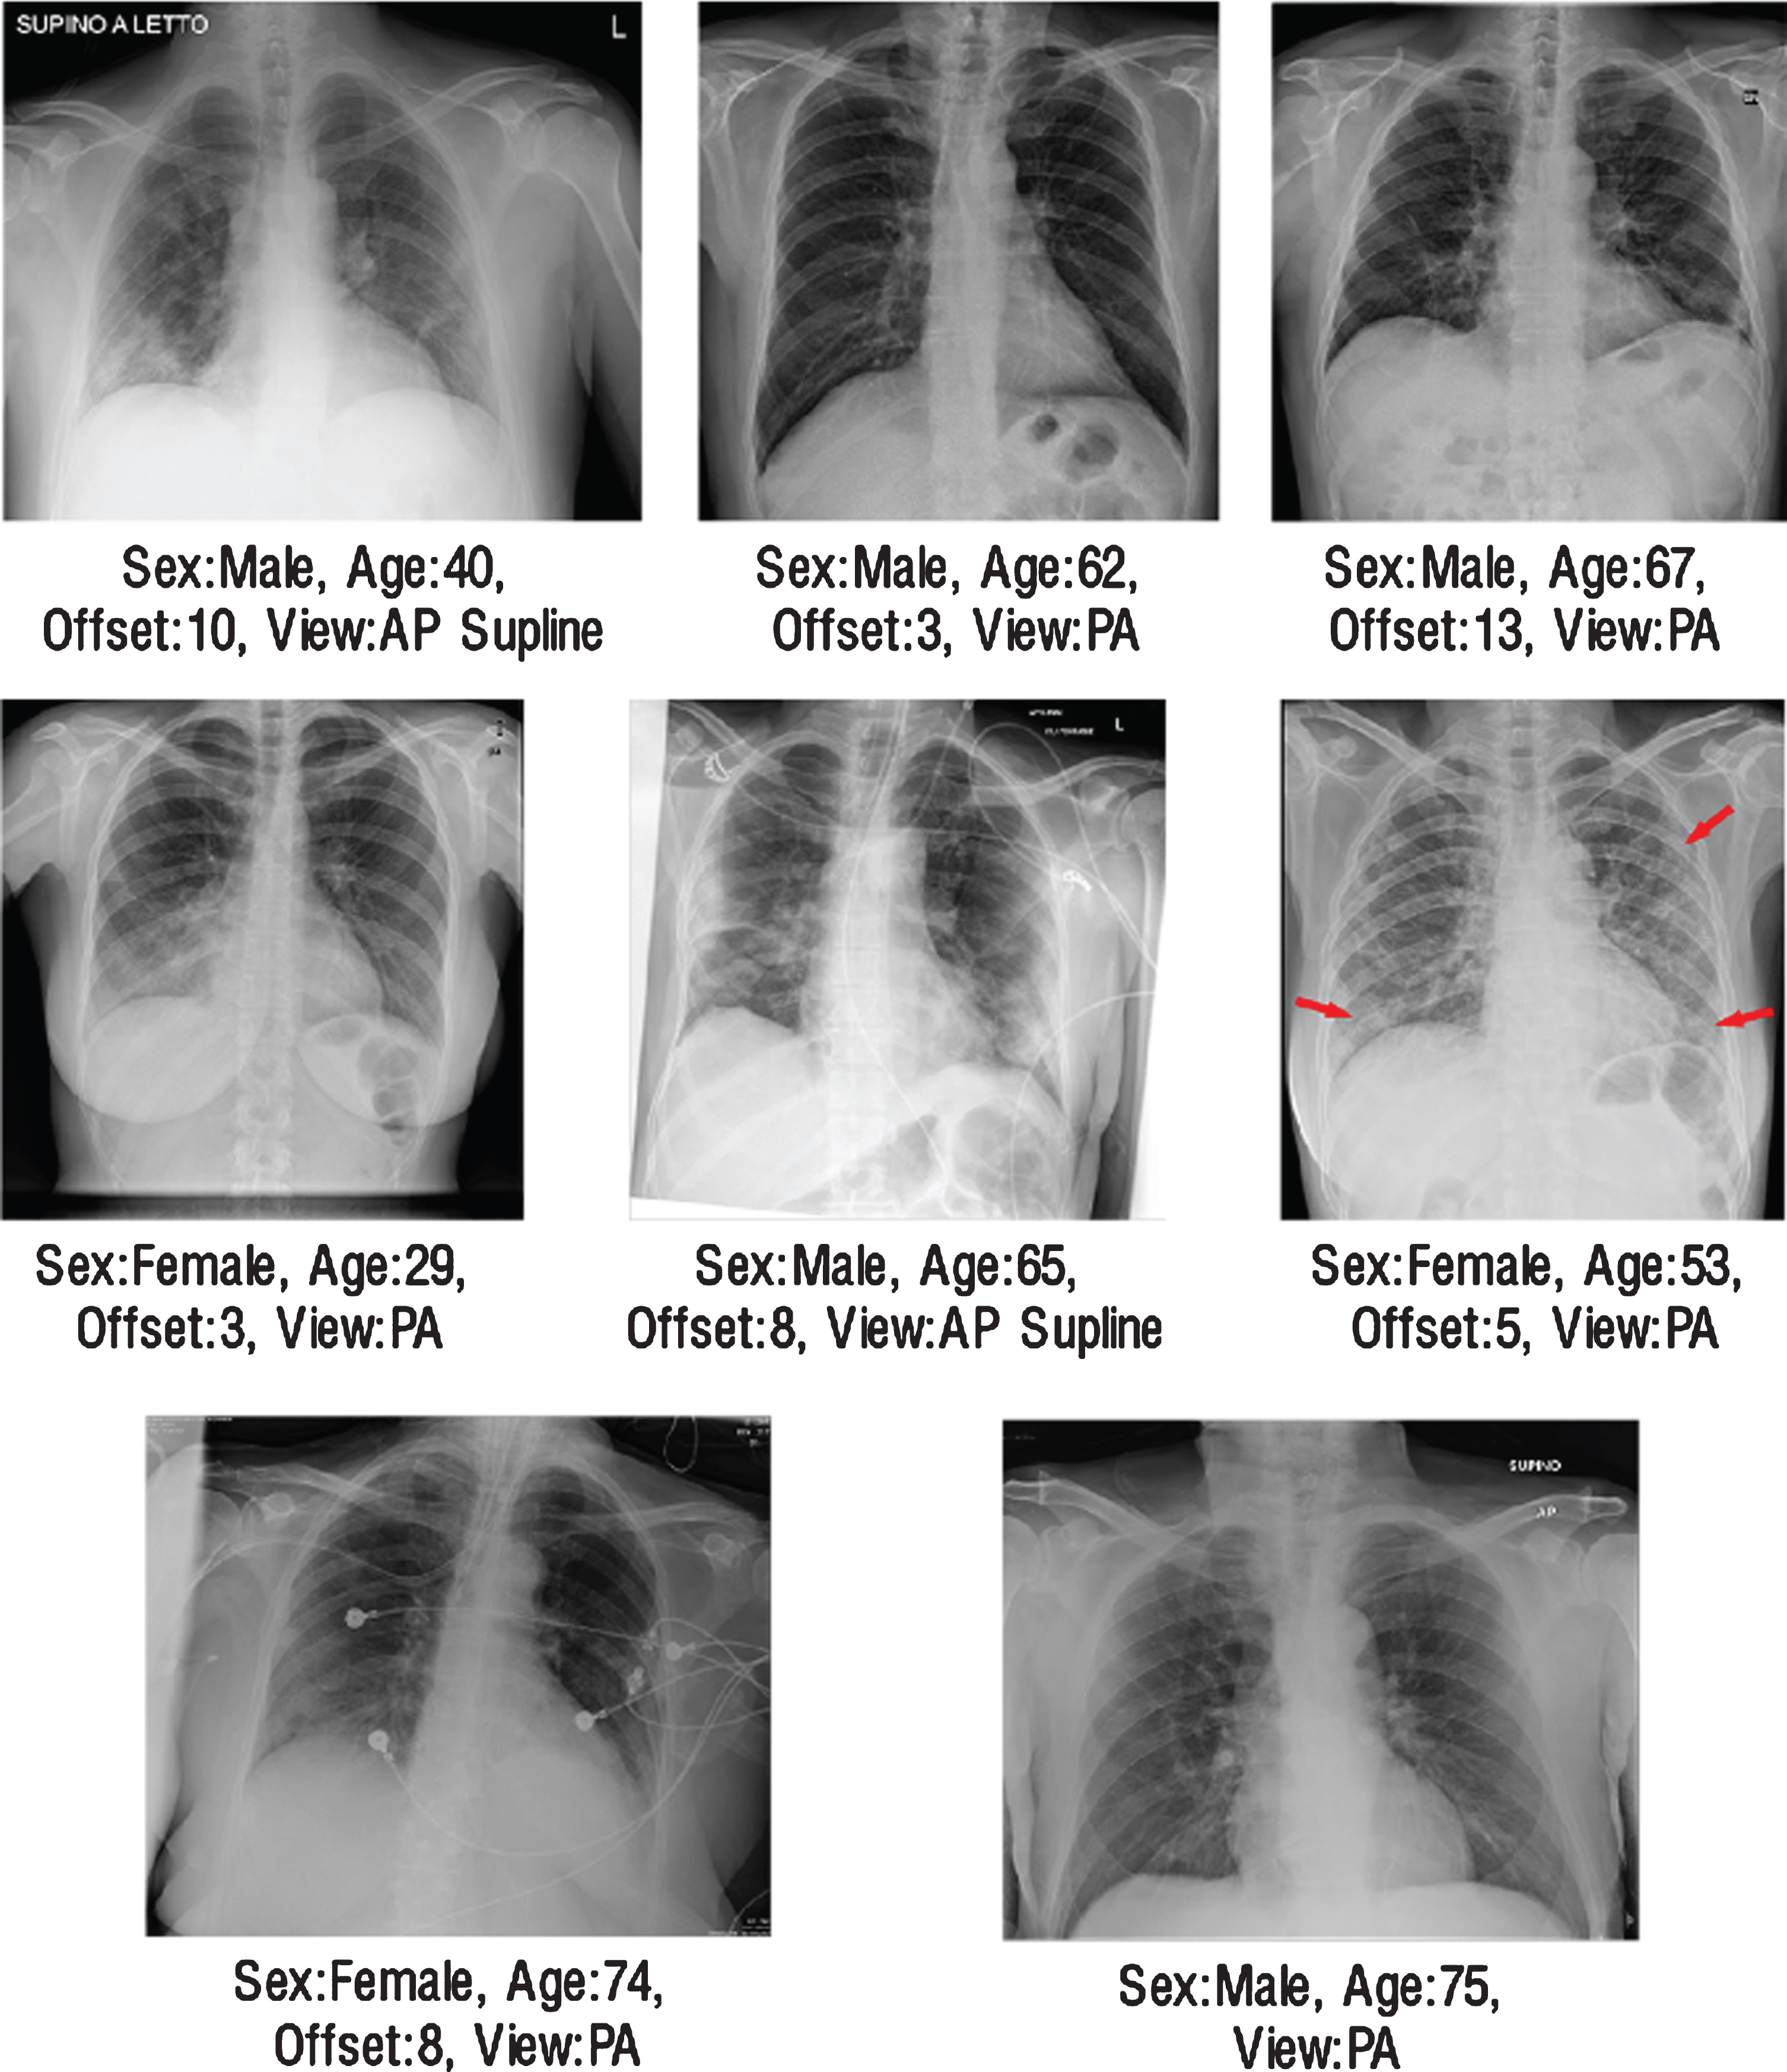 The illustration of radiographs where all networks made same mistakes.